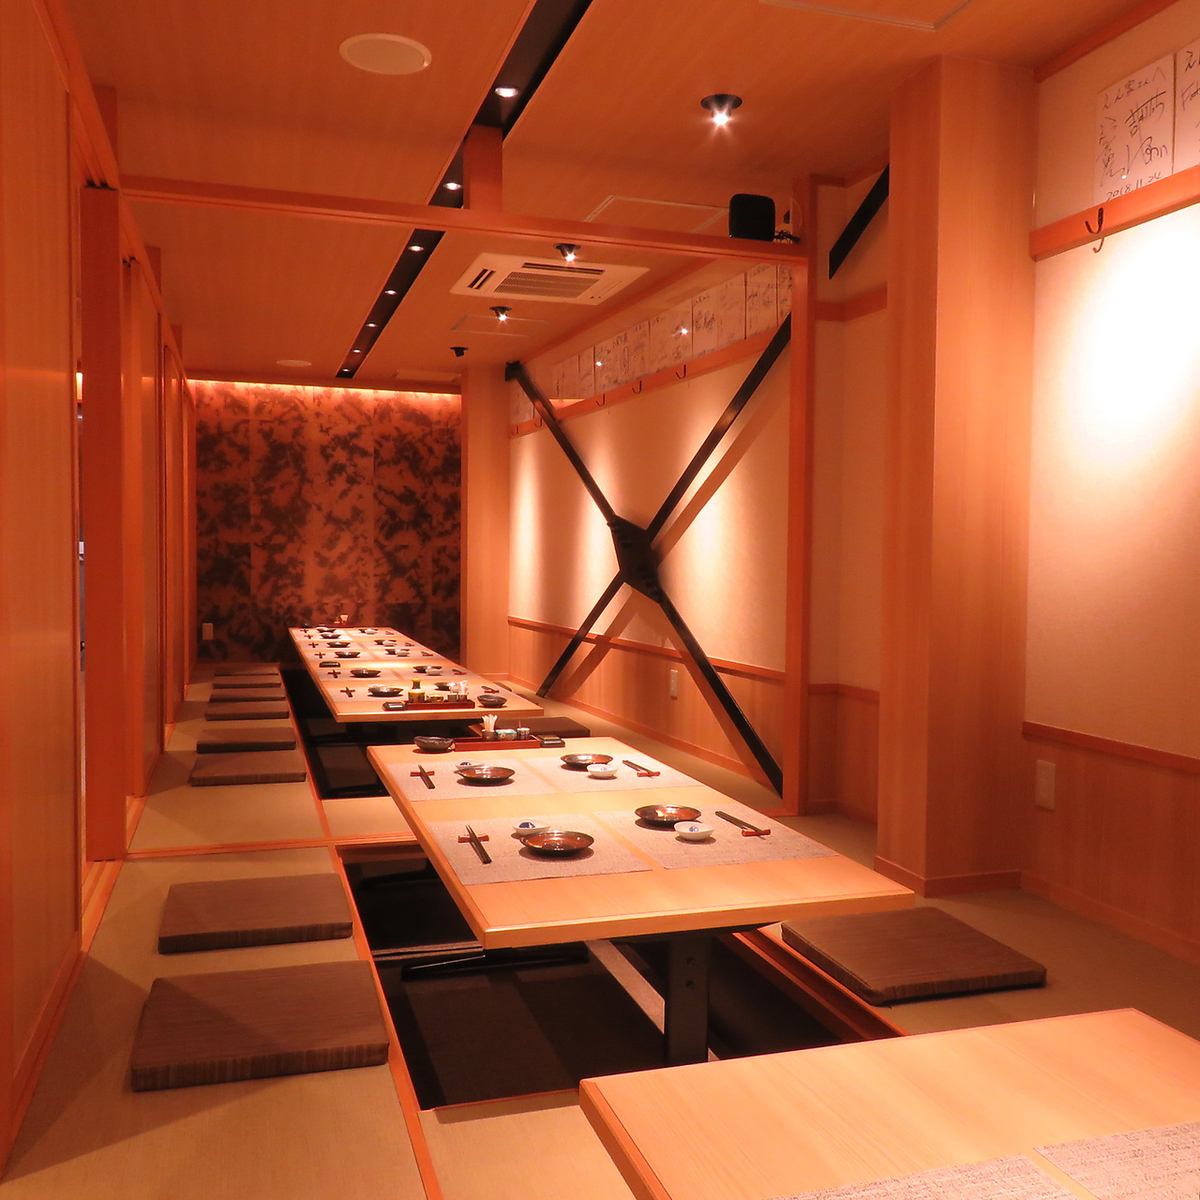 The all-you-can-drink course packed with Kanazawa's specialties, which is ideal for company banquets, starts at 5,000 yen.